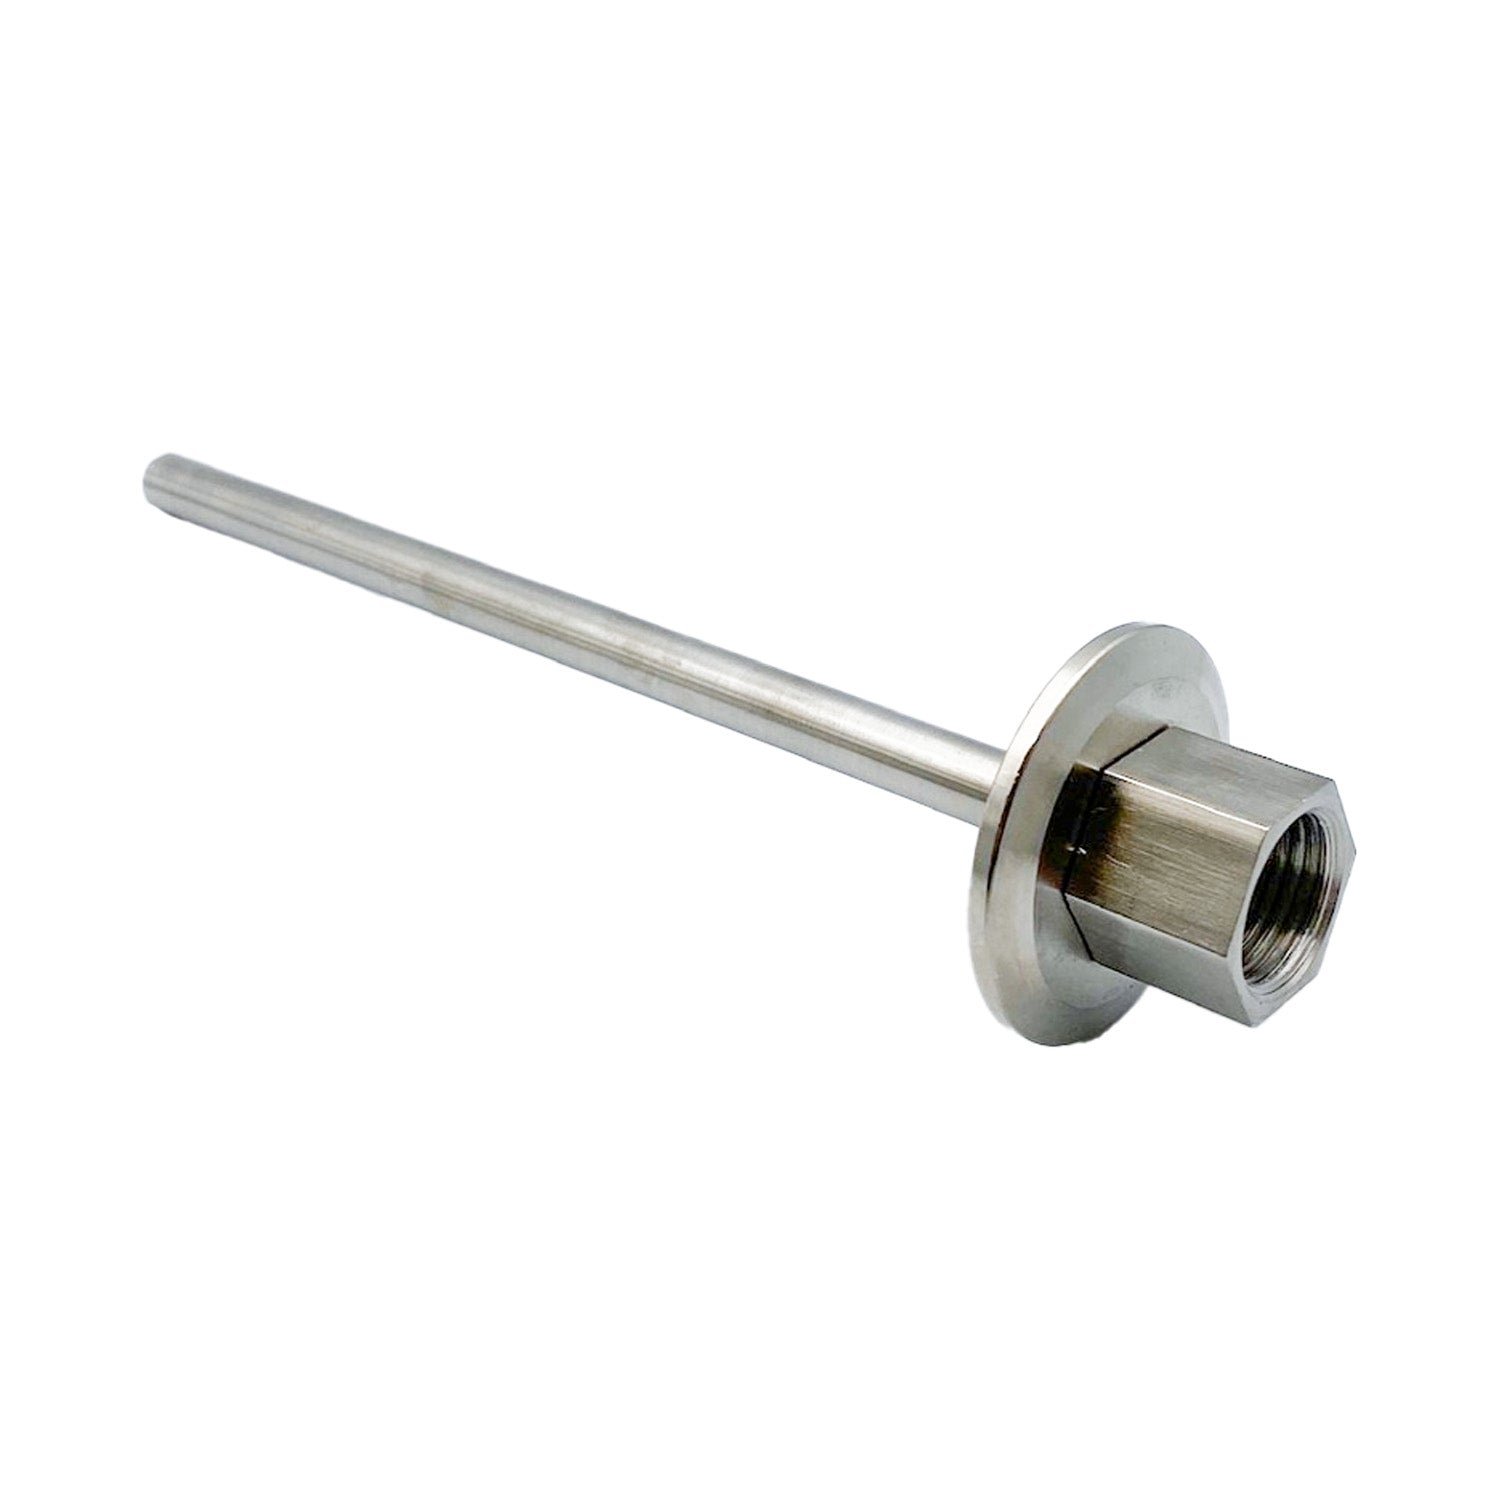 Thermowell, 1.5" TC tank connection. 1/2"NPT. 200MM immersion depth (Pair with 250MM Probe)